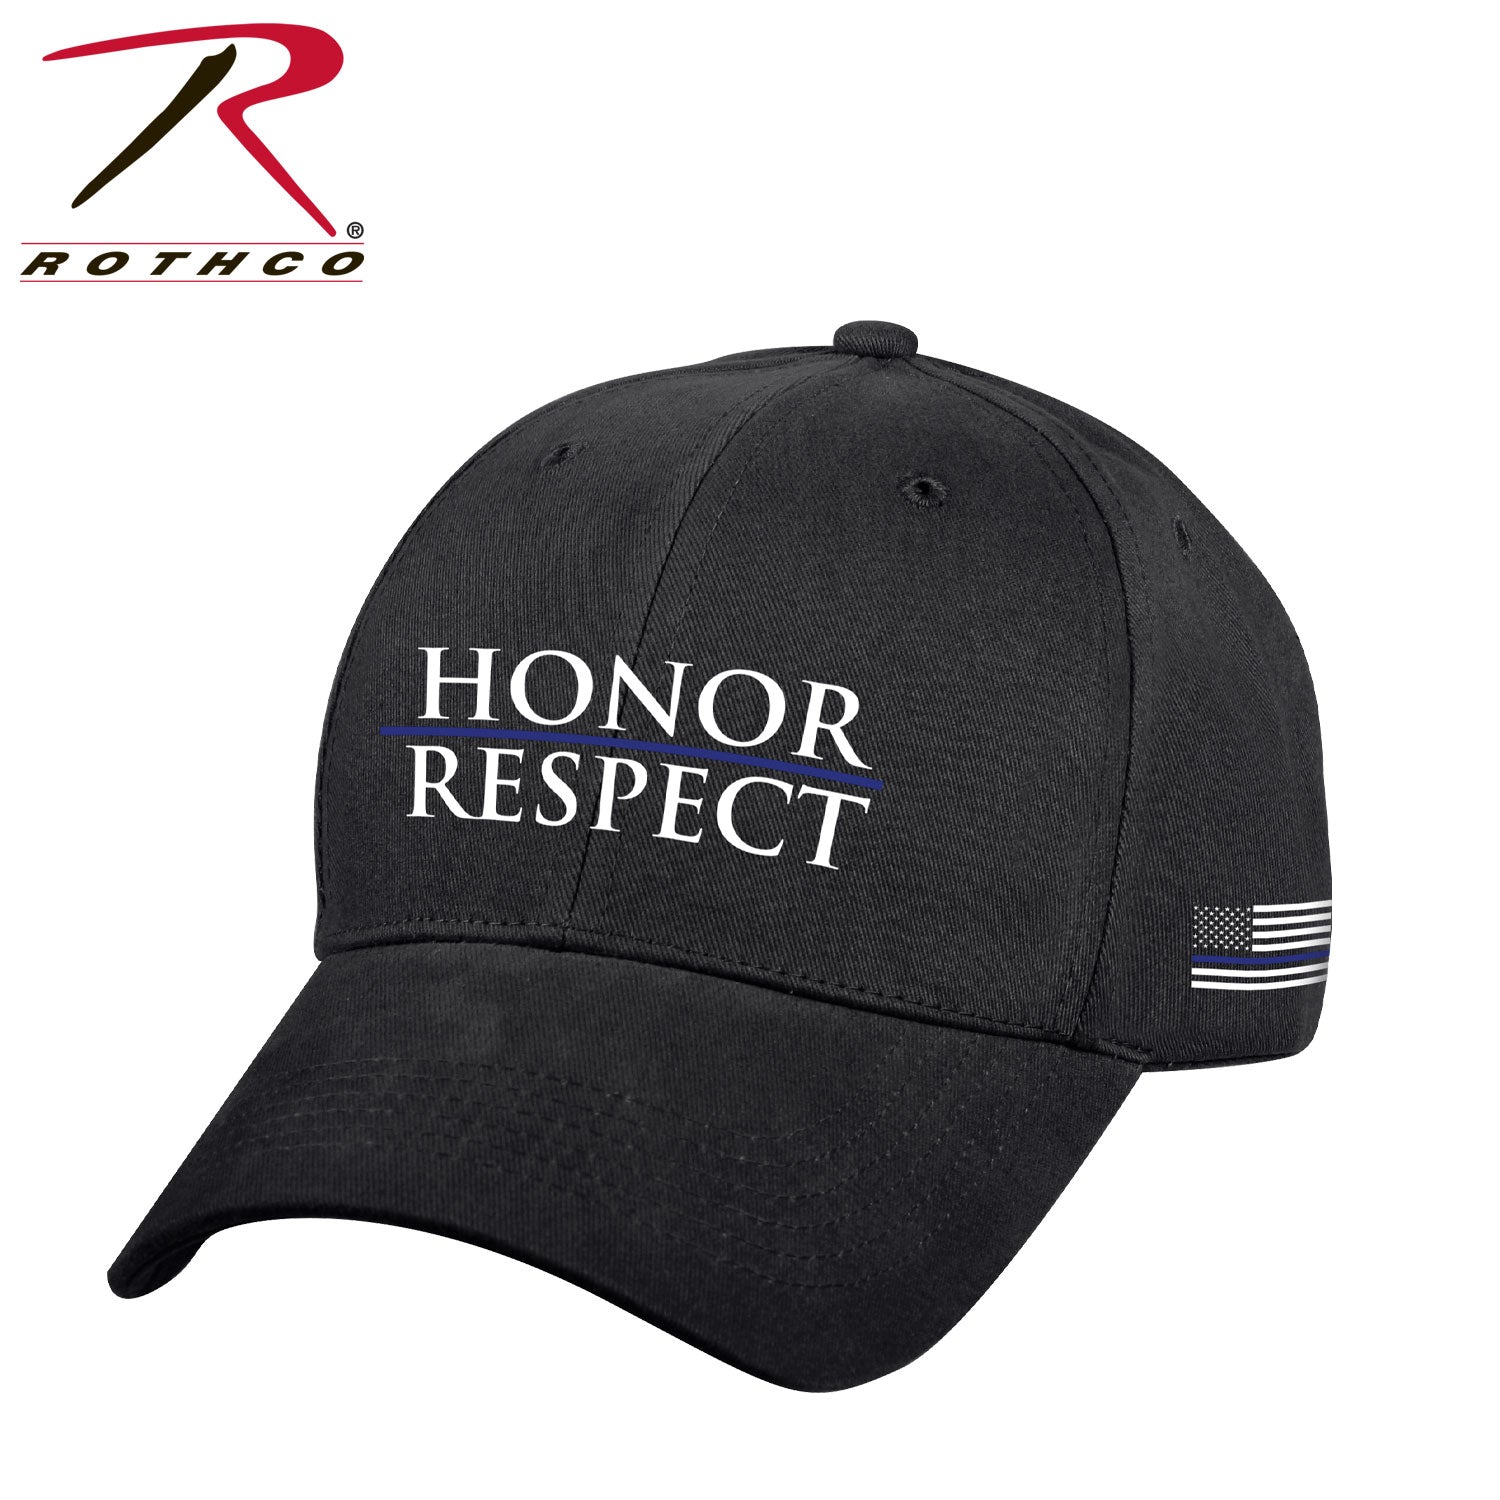 Rothco Honor and Respect Thin Blue Line Low Profile Cap